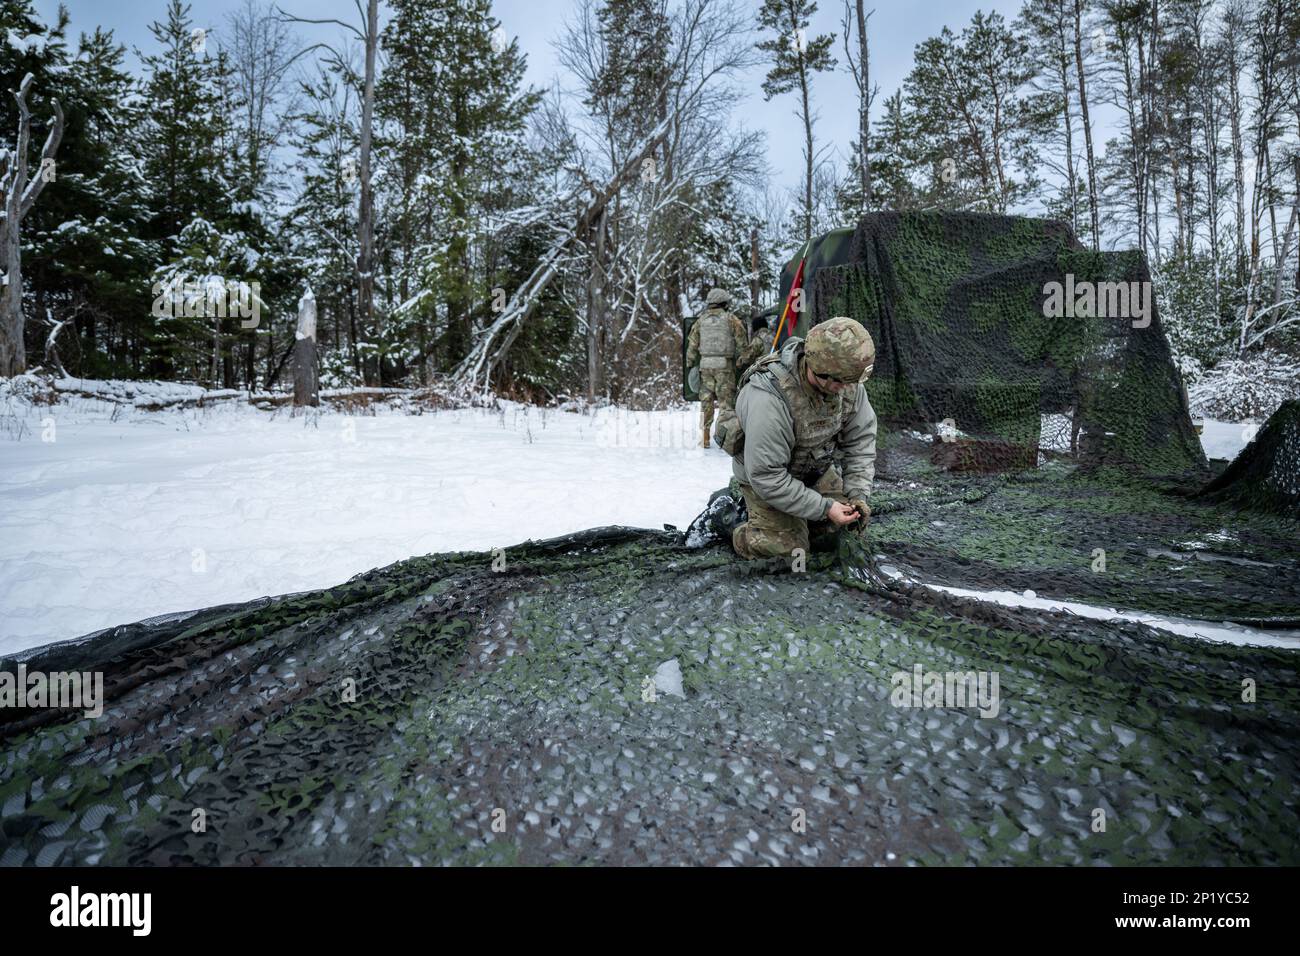 Army Spc. Francis Sprecher, 1-120th Field Artillery Regiment, sews together a camouflage canopy while setting up an M119 howitzer during Northern Strike 23-1, Jan. 25, 2023, at Camp Grayling, Mich. Units that participate in Northern Strike’s winter iteration build readiness by conducting joint, cold-weather training designed to meet objectives of the Department of Defense’s Arctic Strategy. Stock Photo